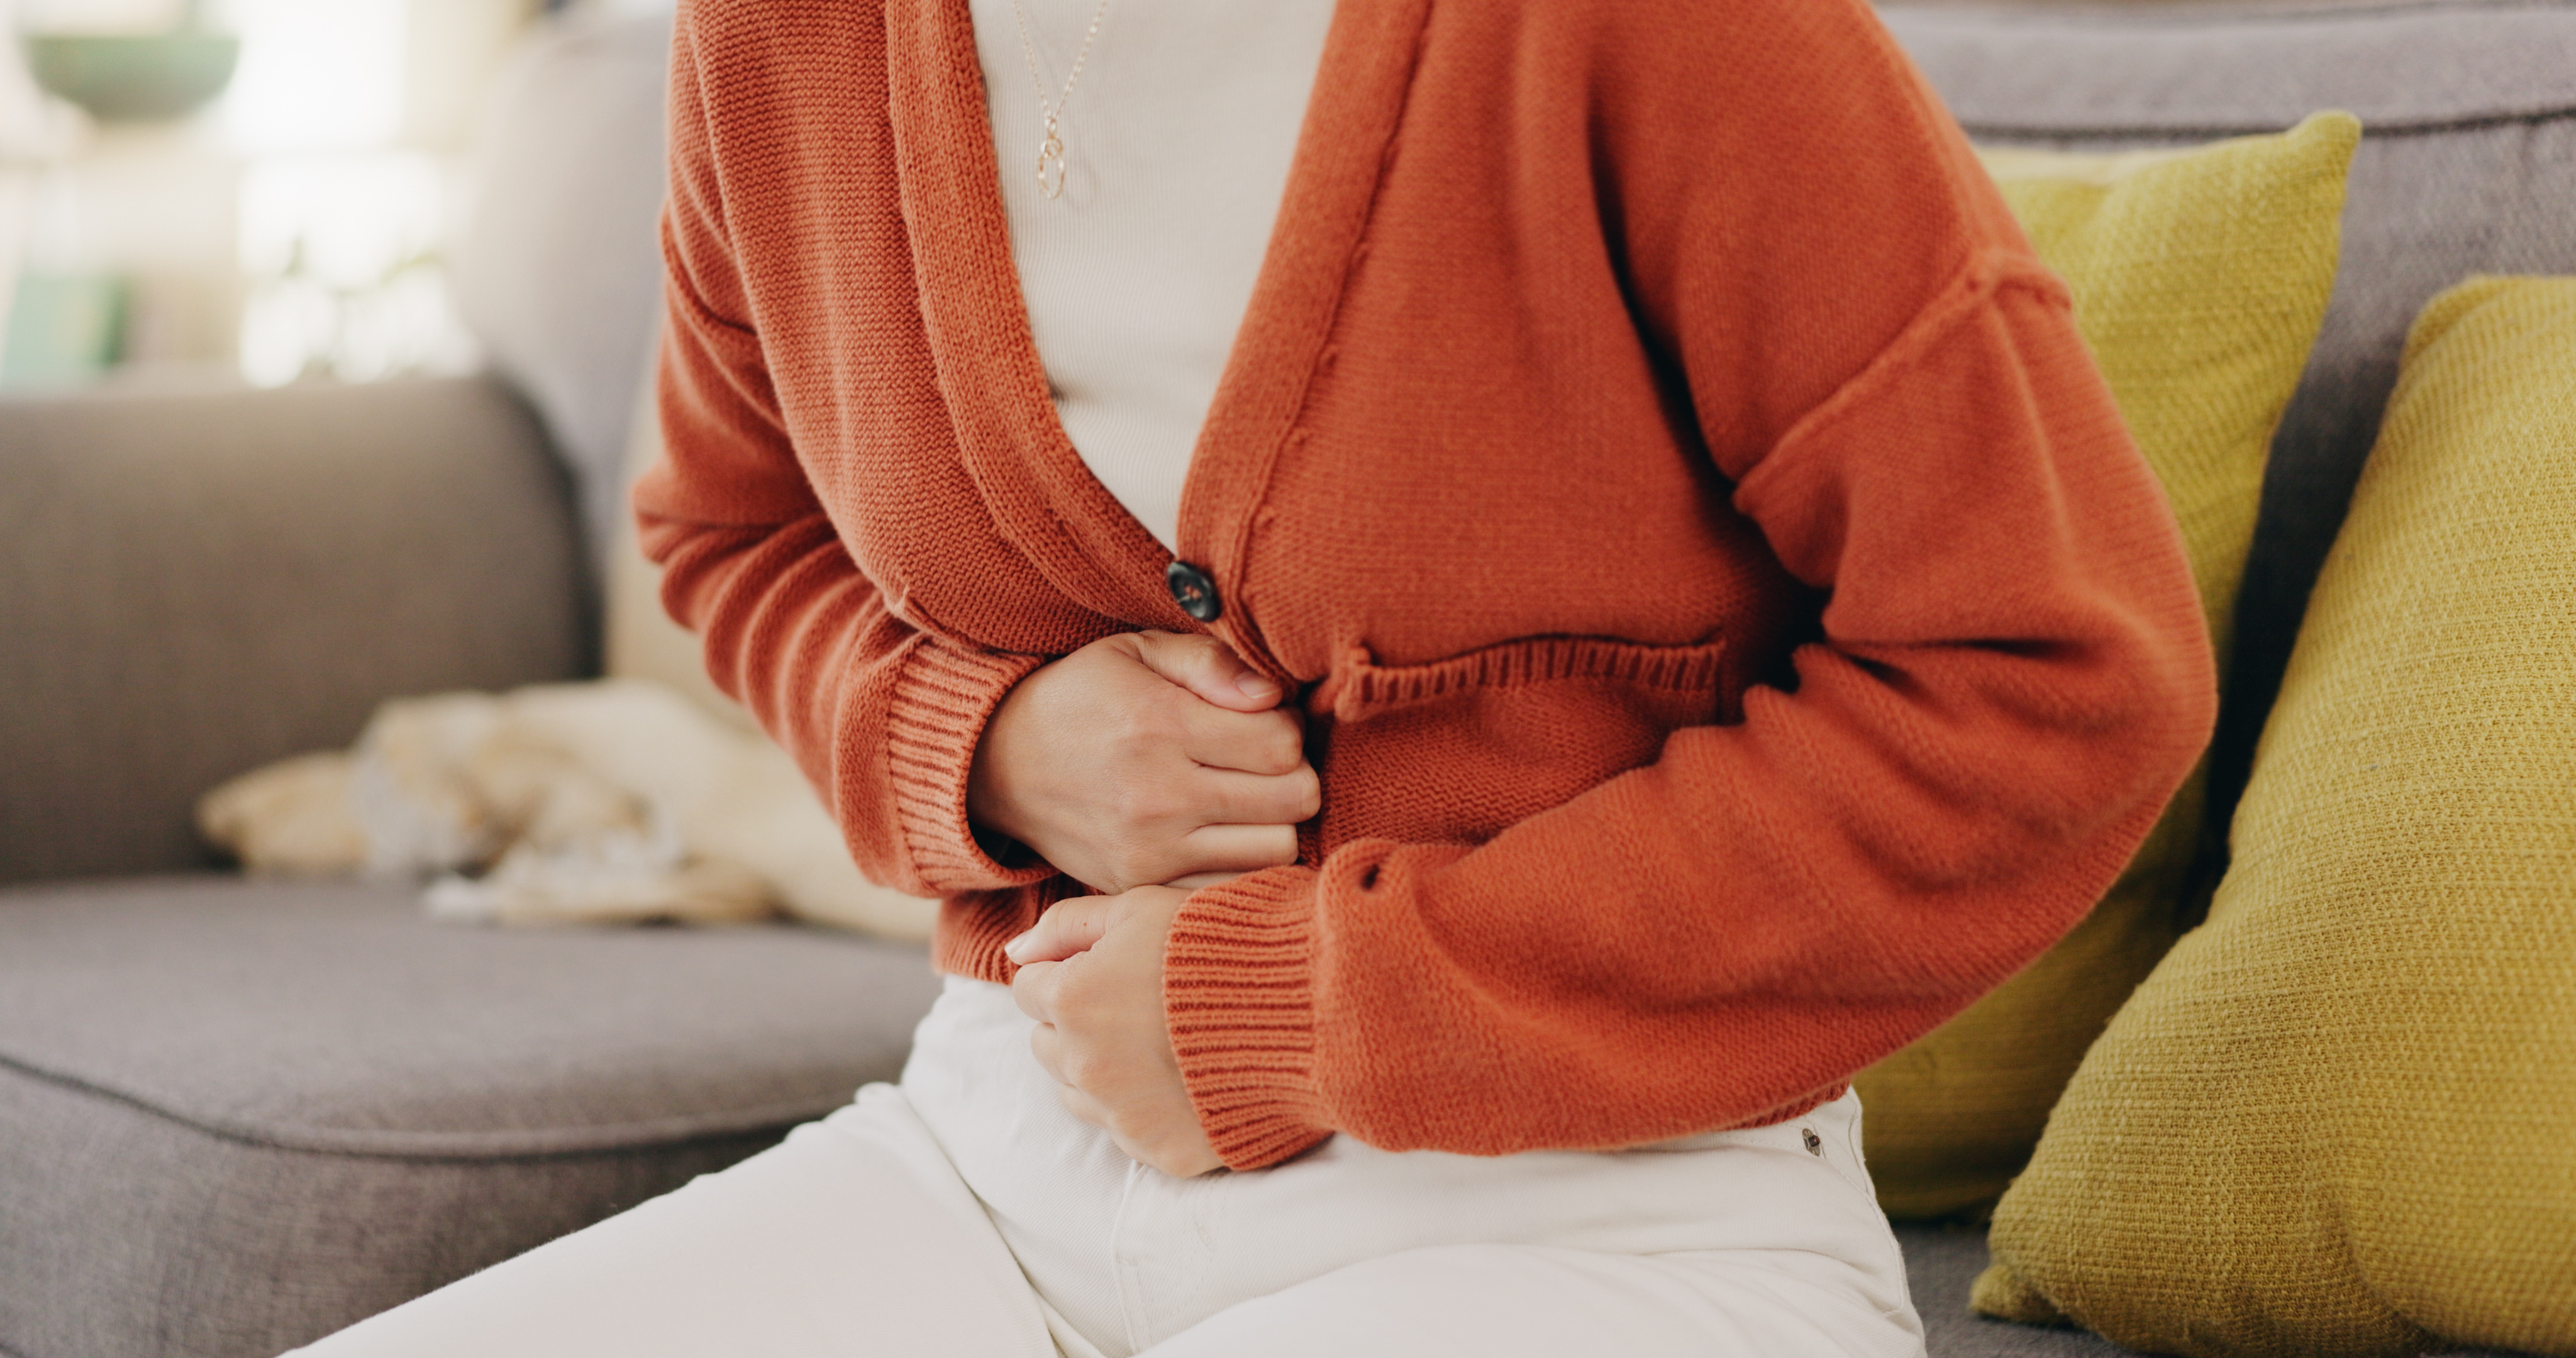 A woman experiencing stomach pain - learn how you can find relief with Vida-Flo's IV hydration treatment for gastrointestinal diseases in Murfreesboro, TN.